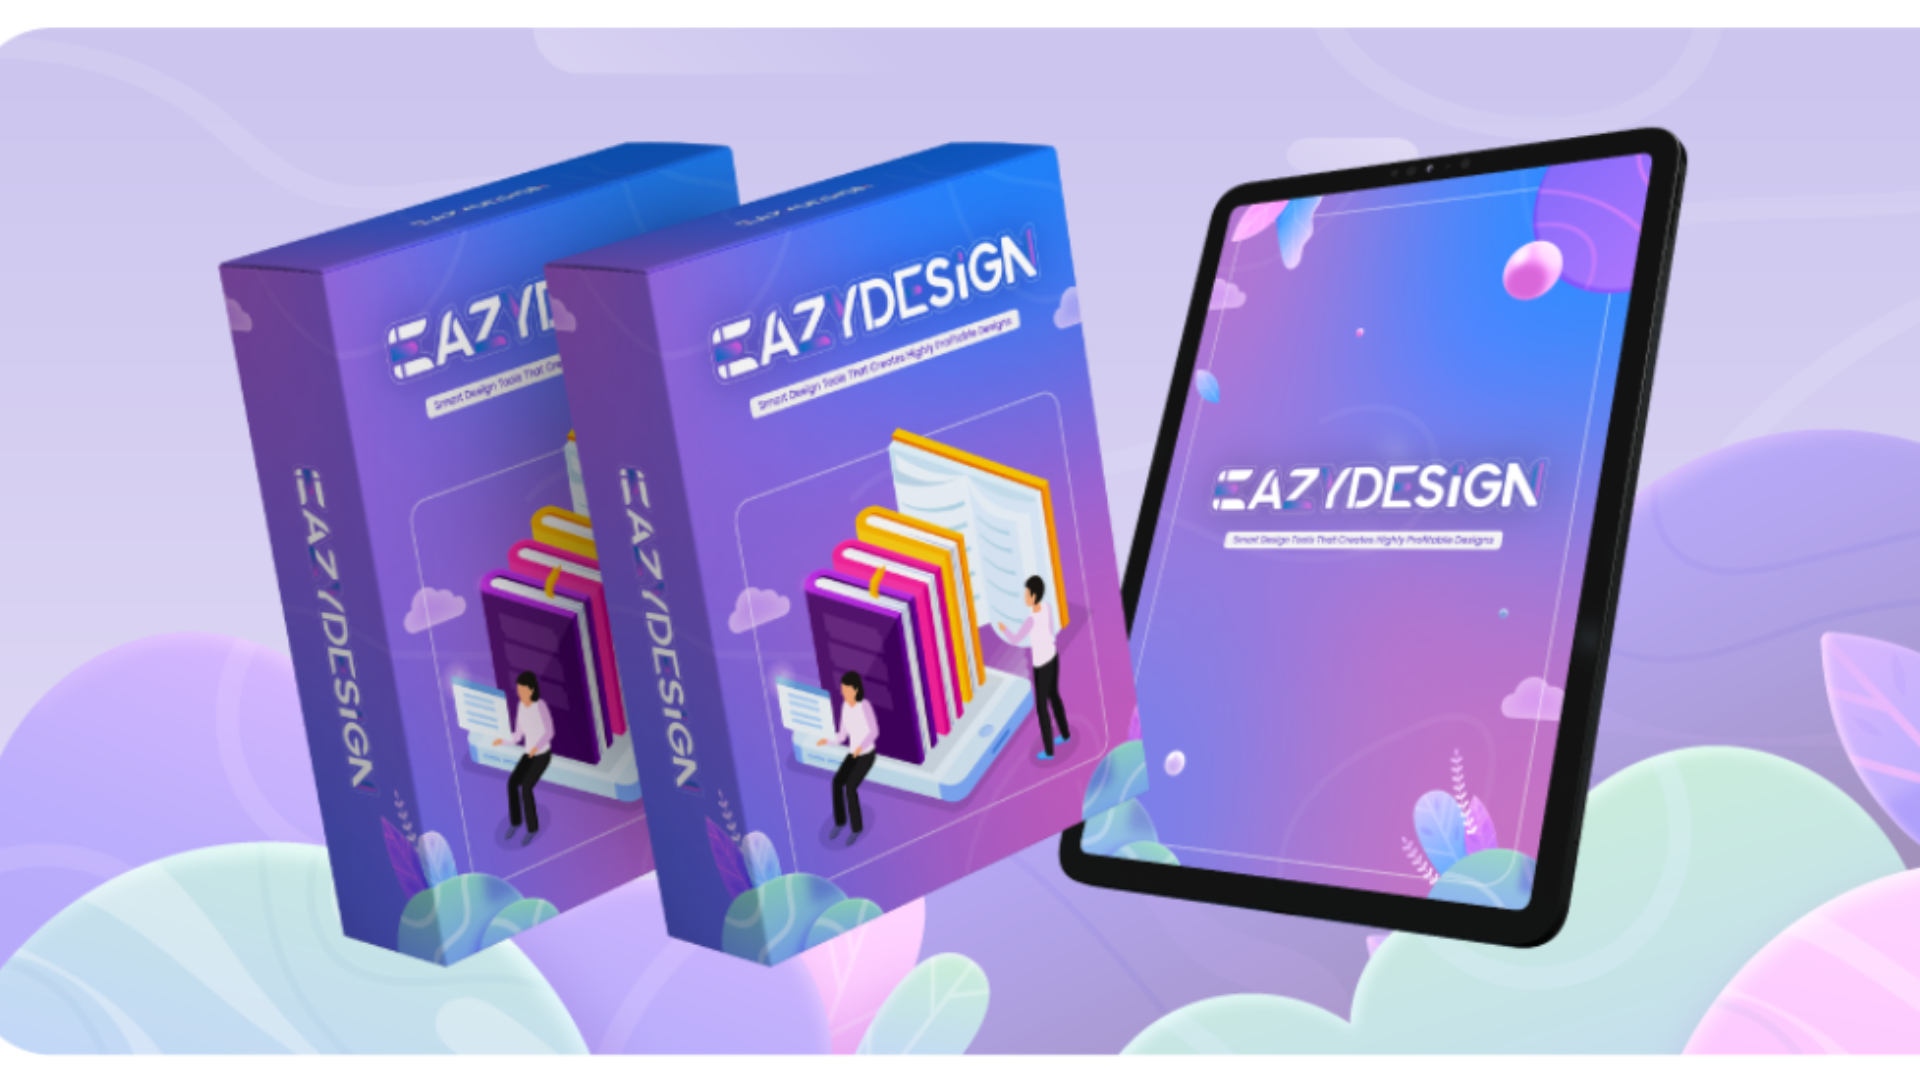 EazyDesign – (PLR) Canva Design Templates Ready to Sell Review